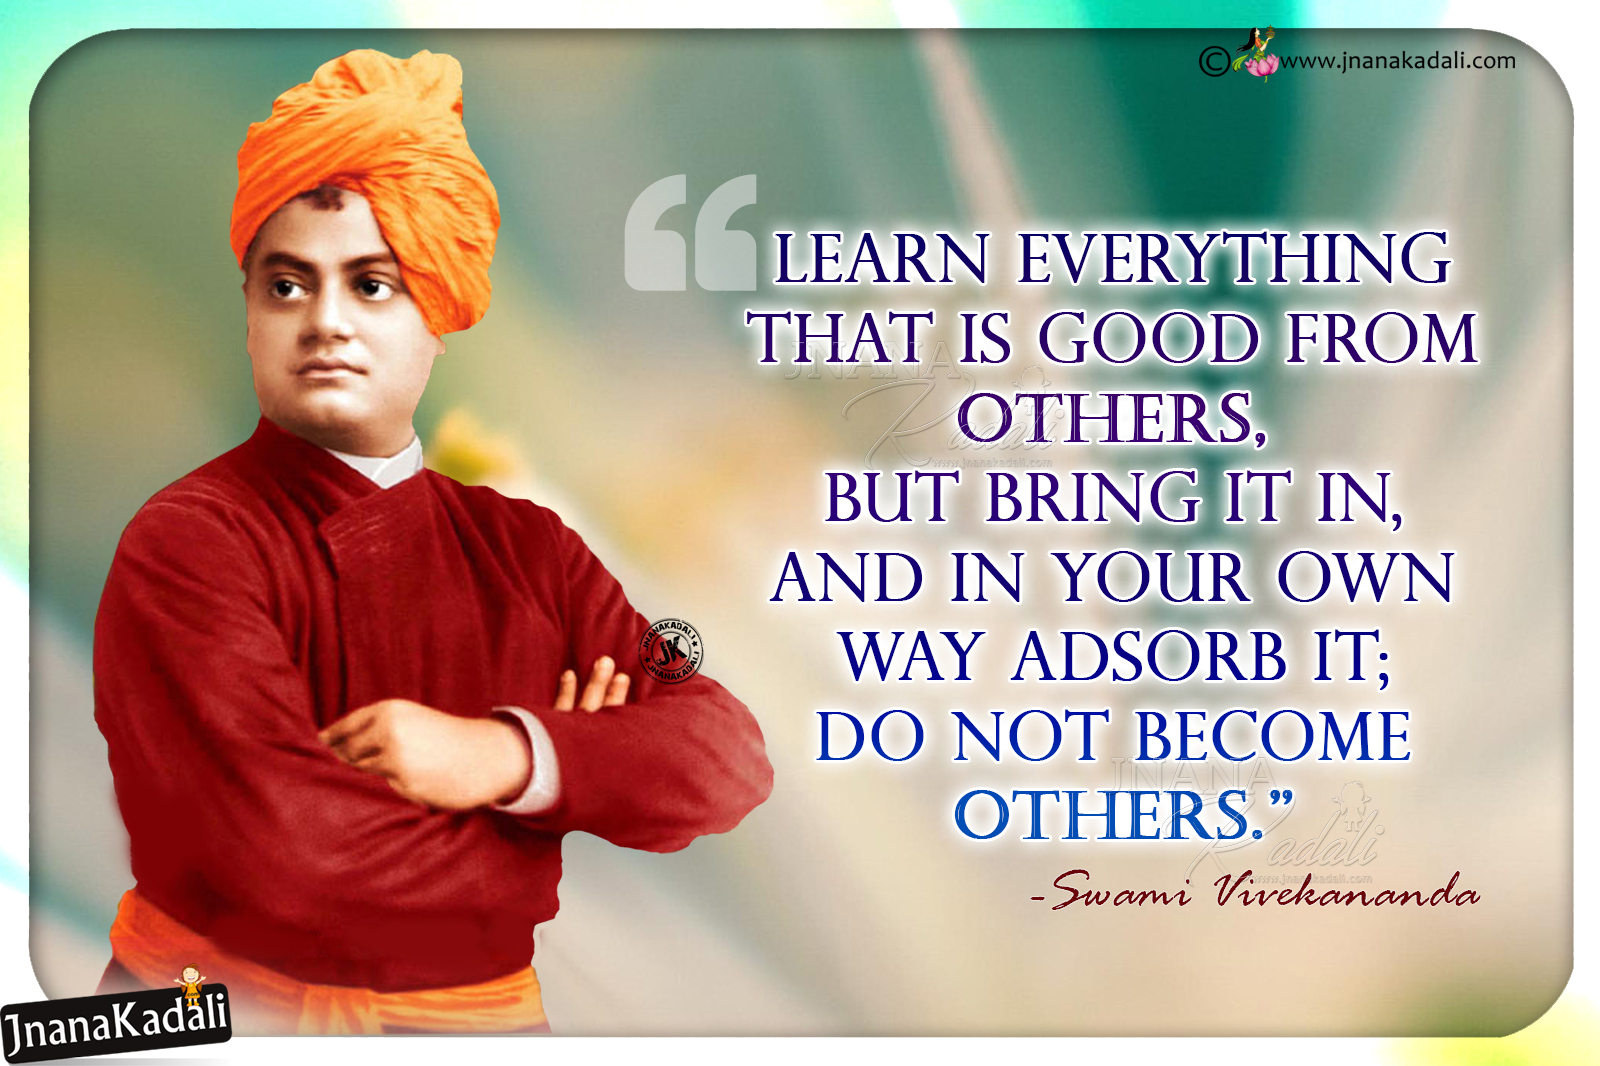 Swami Vivekananda Motivational Life Changing Quotes Wallpapers in